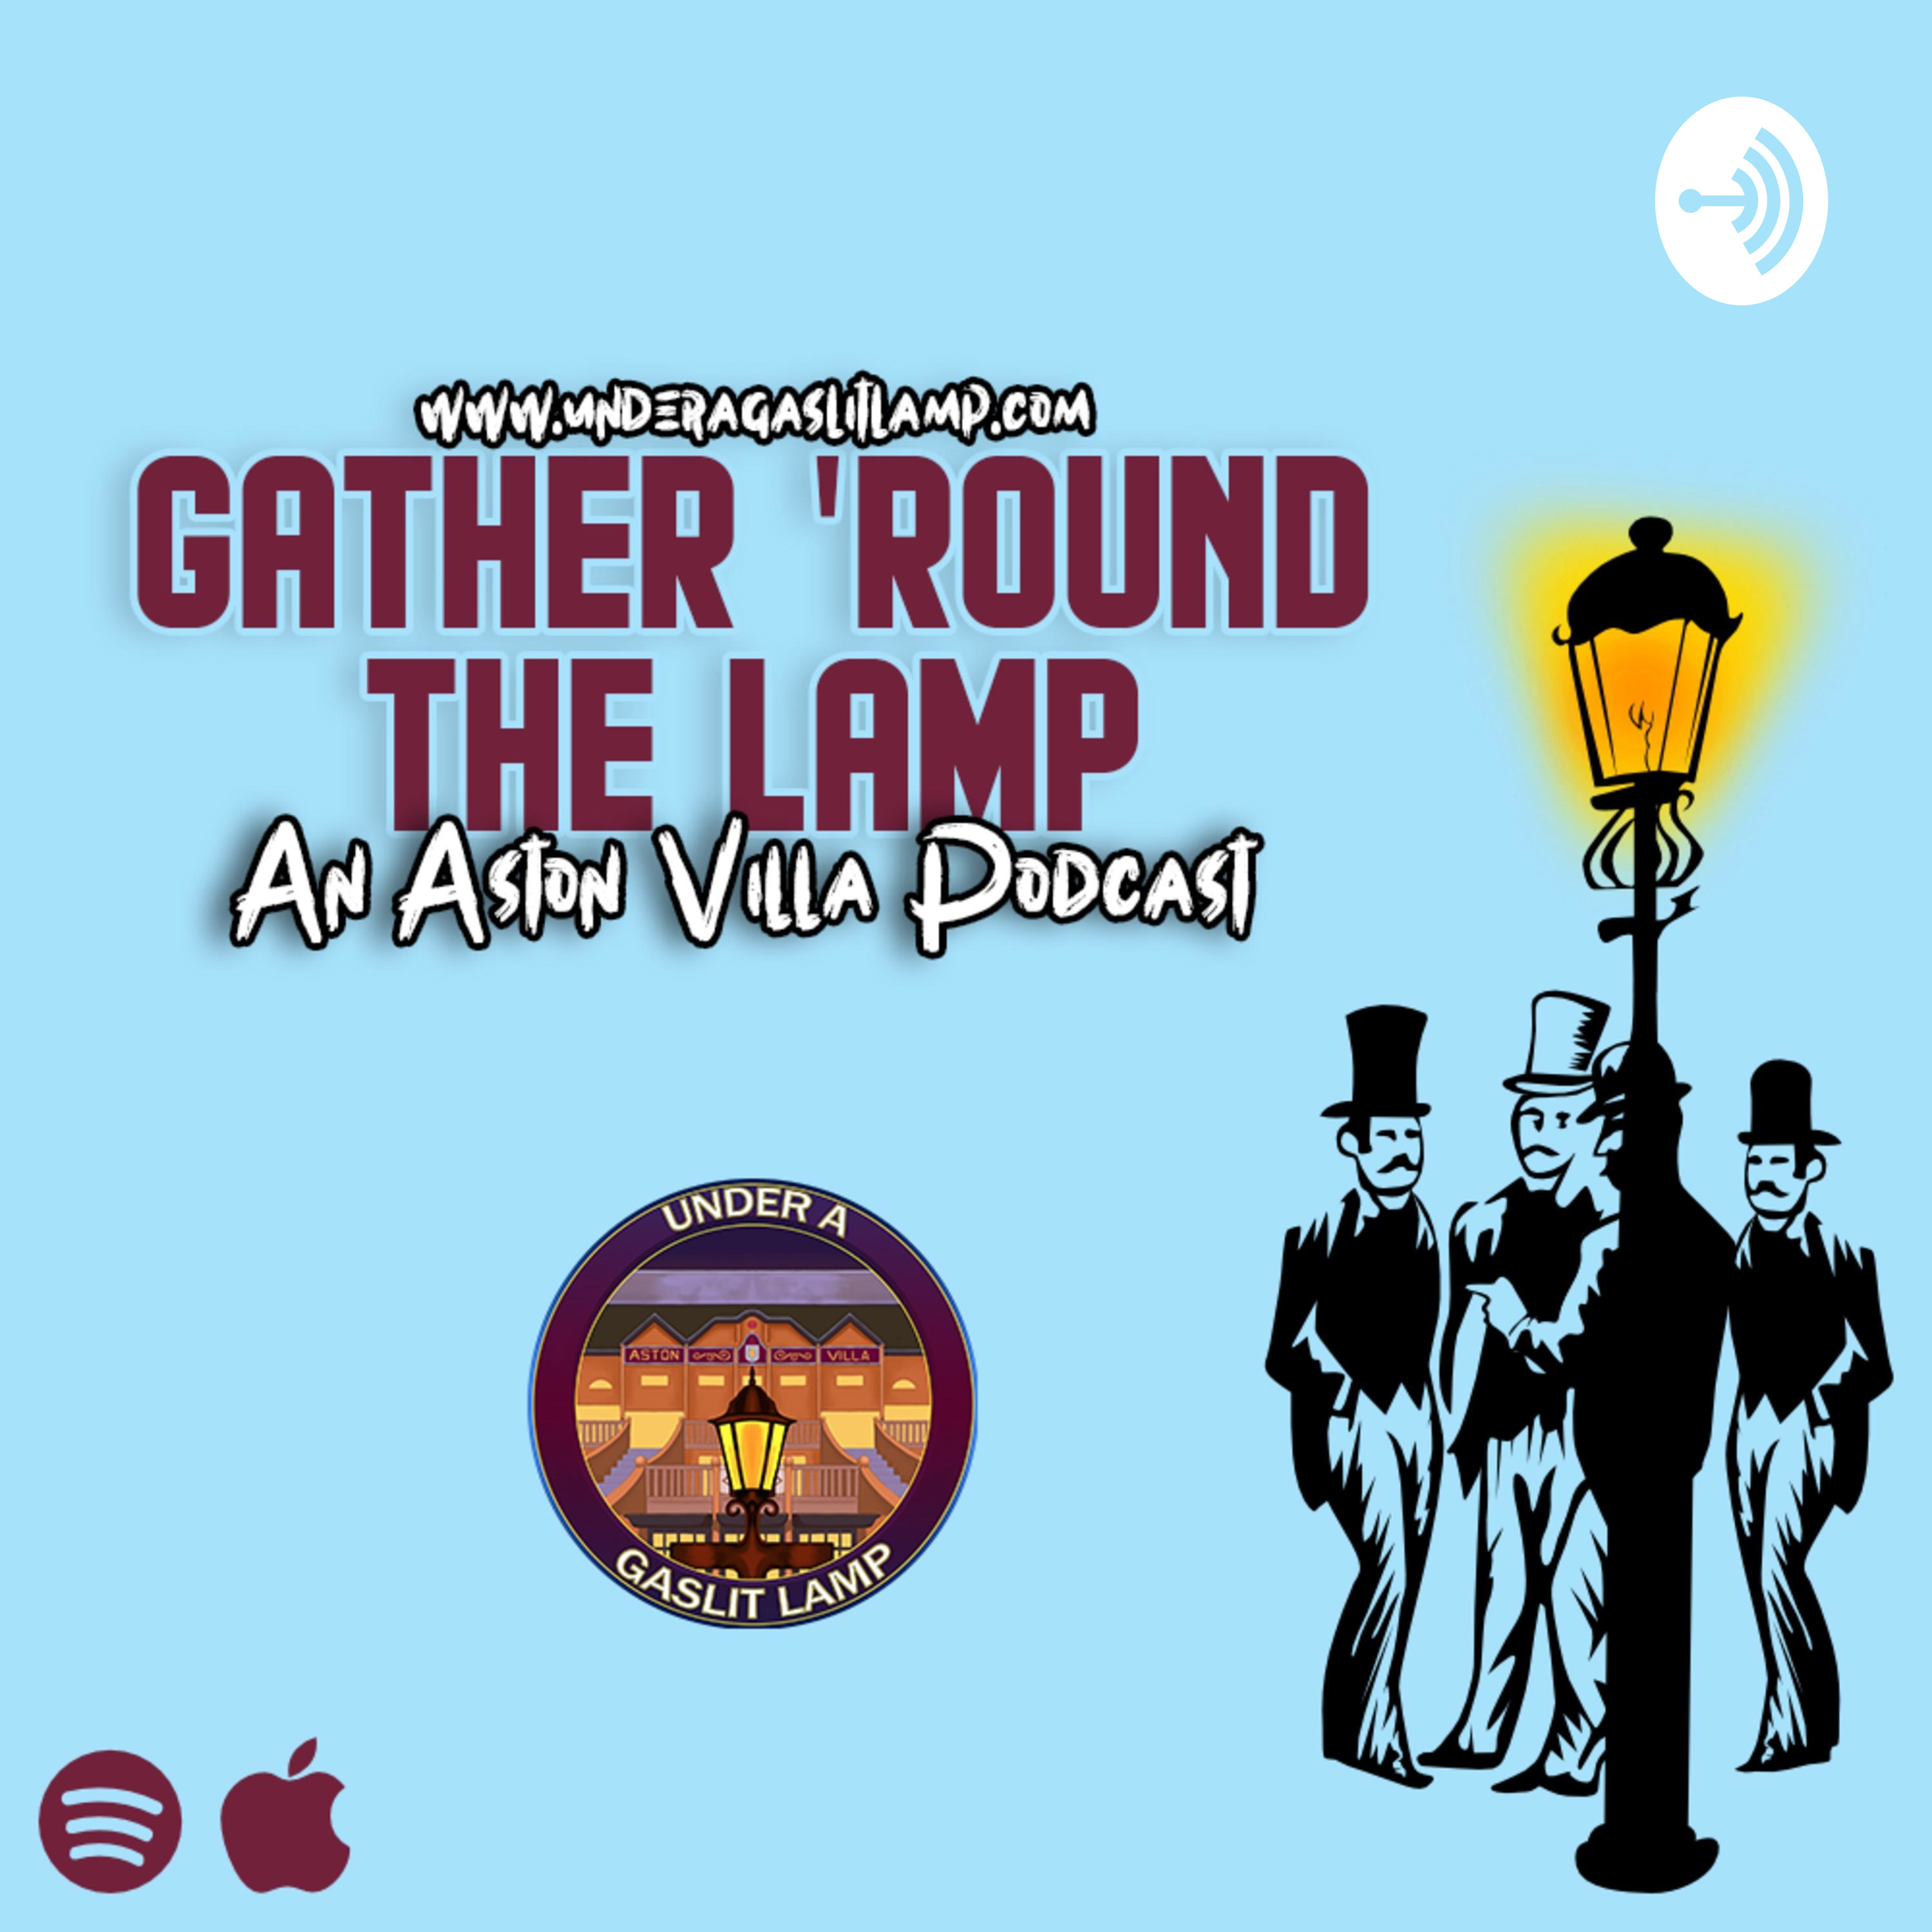 Gather ’Round The Lamp S4 E6 - That’s The Spirit